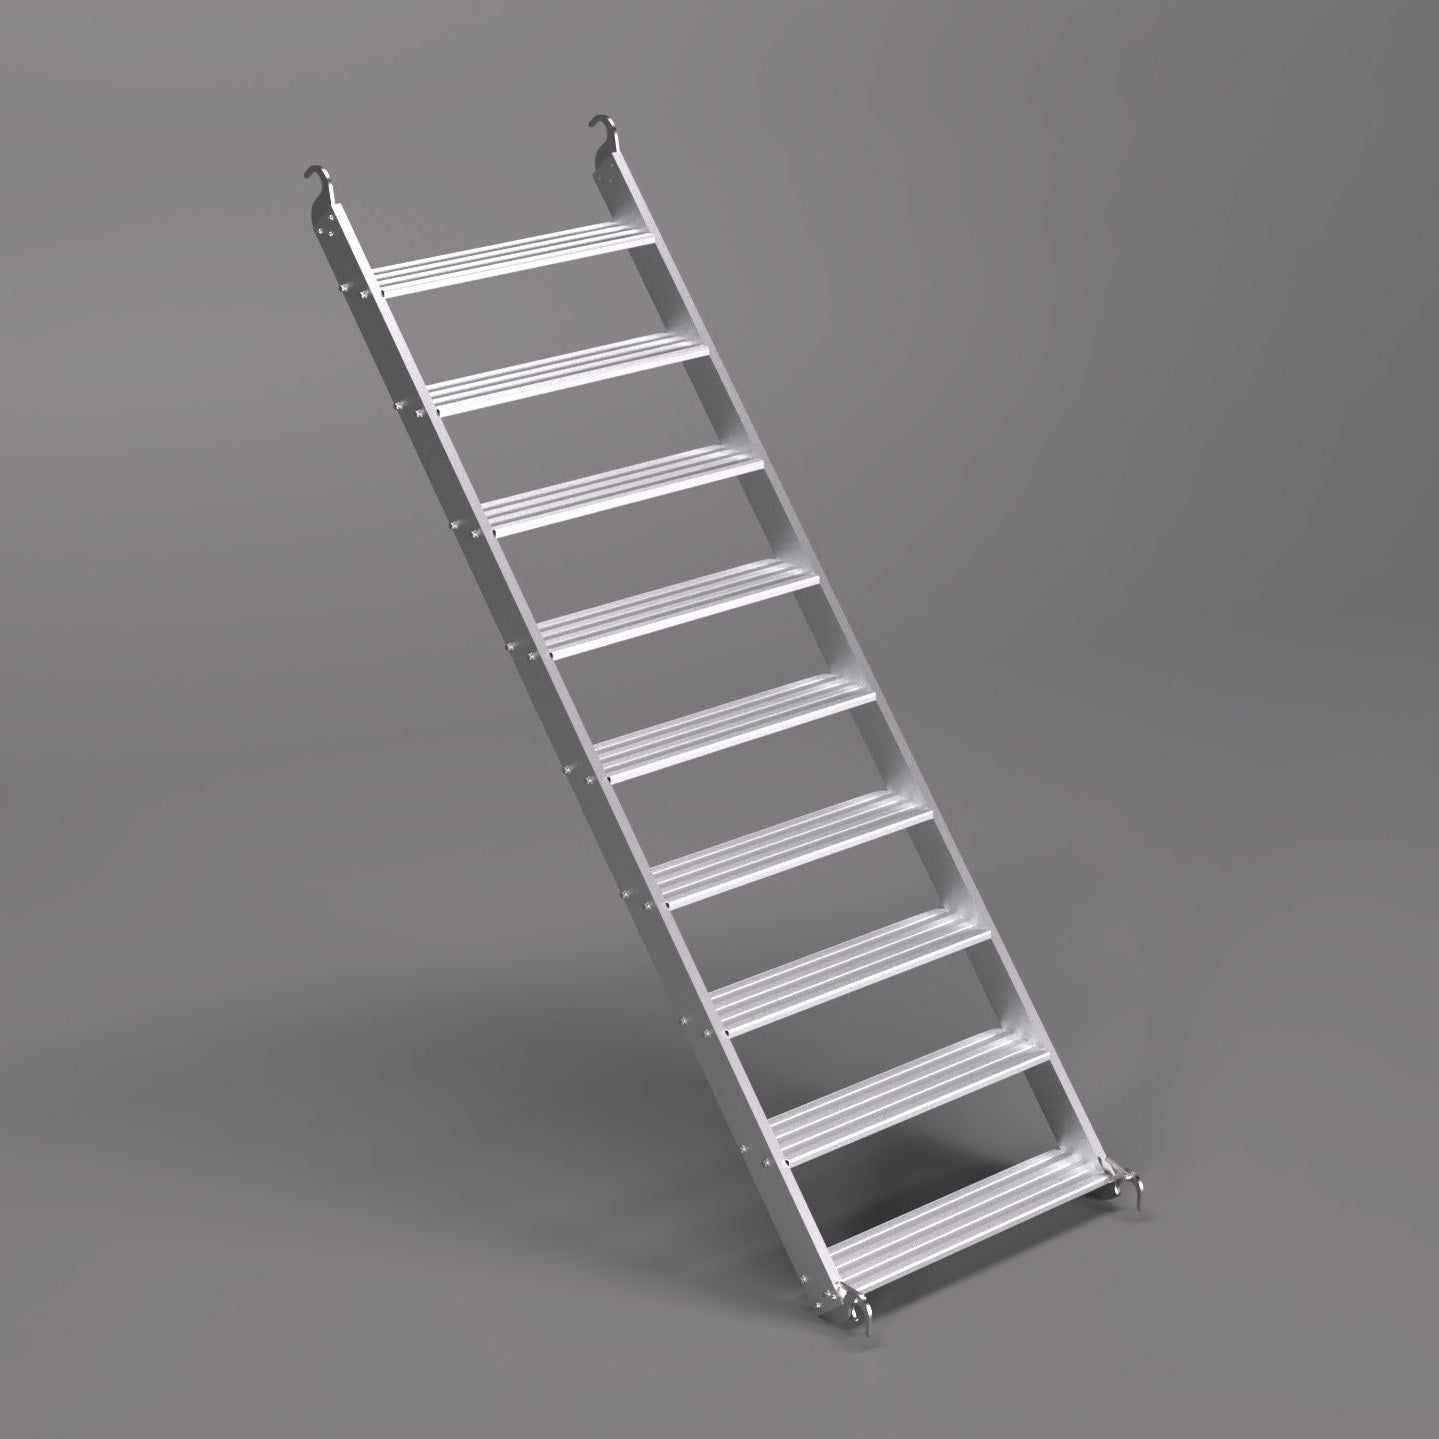 An image of the 2m ALTO Cup System stair unit.